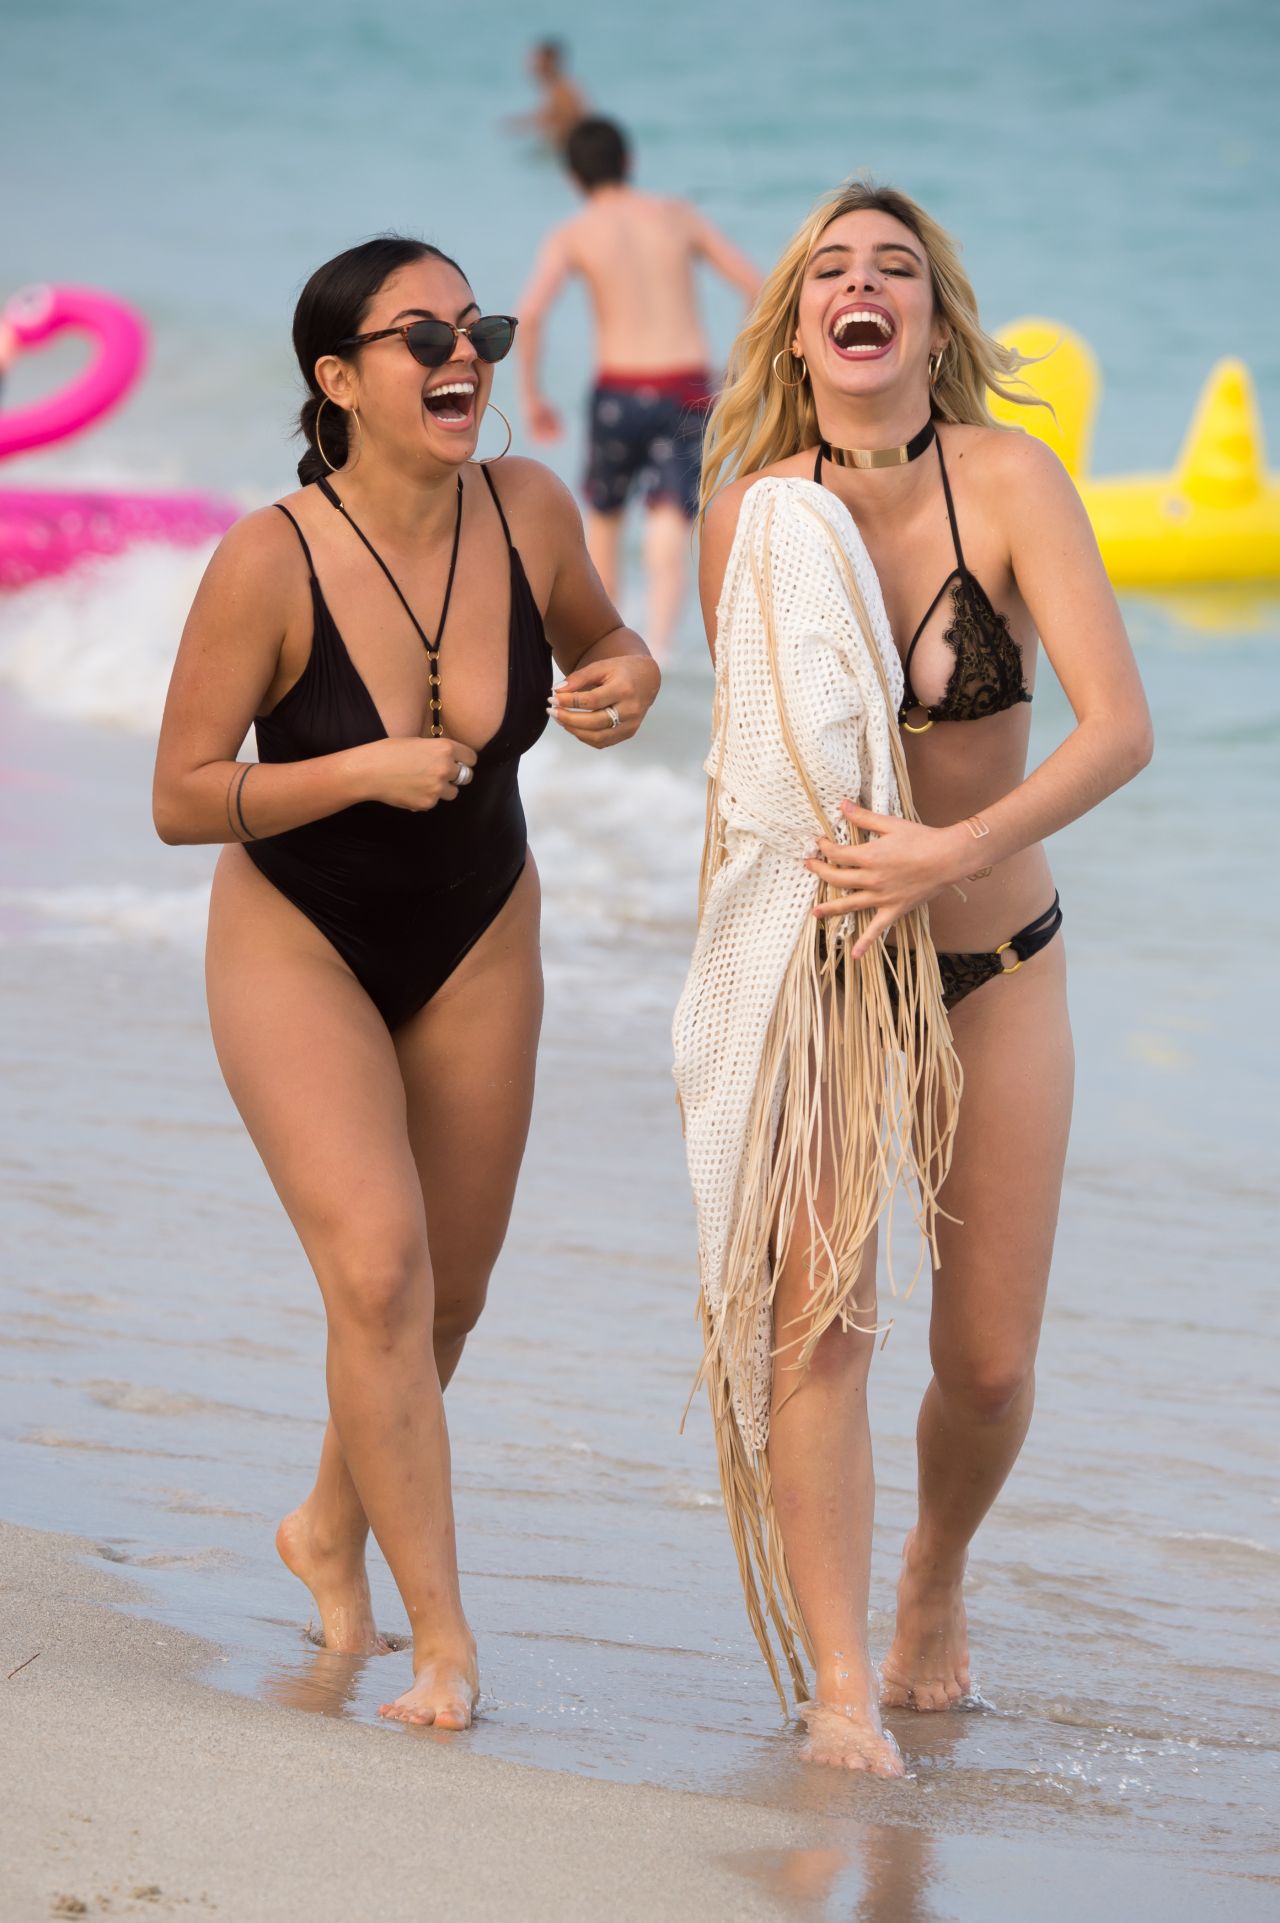 lele-pons-and-inanna-on-the-beach-in-miami-beach-14.jpg